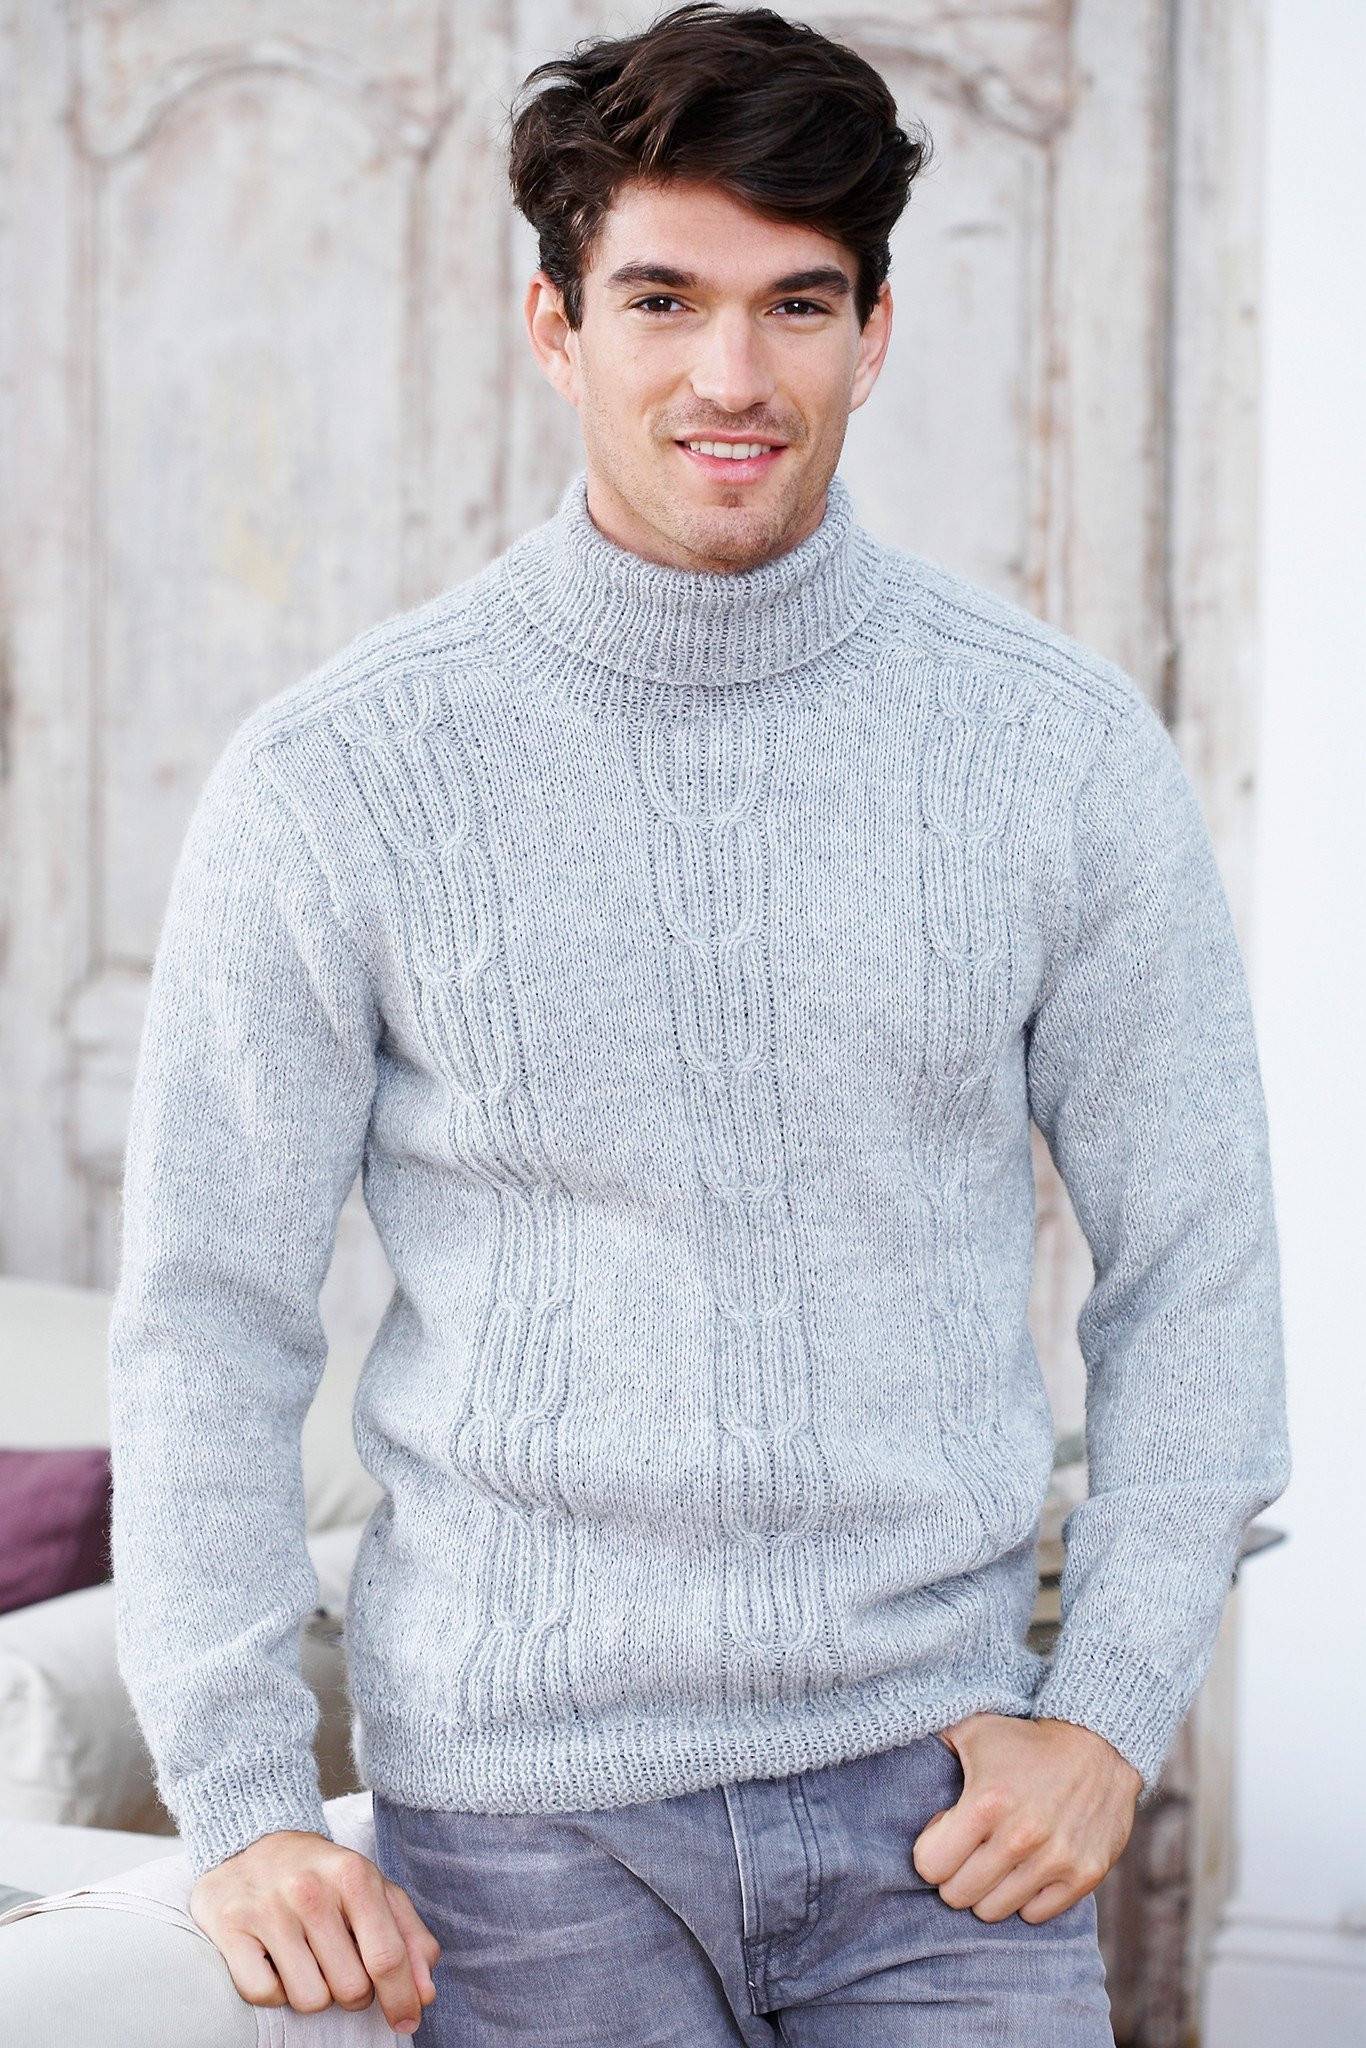 Mens Sweater Vintage Knitting Pattern | The Knitting Network